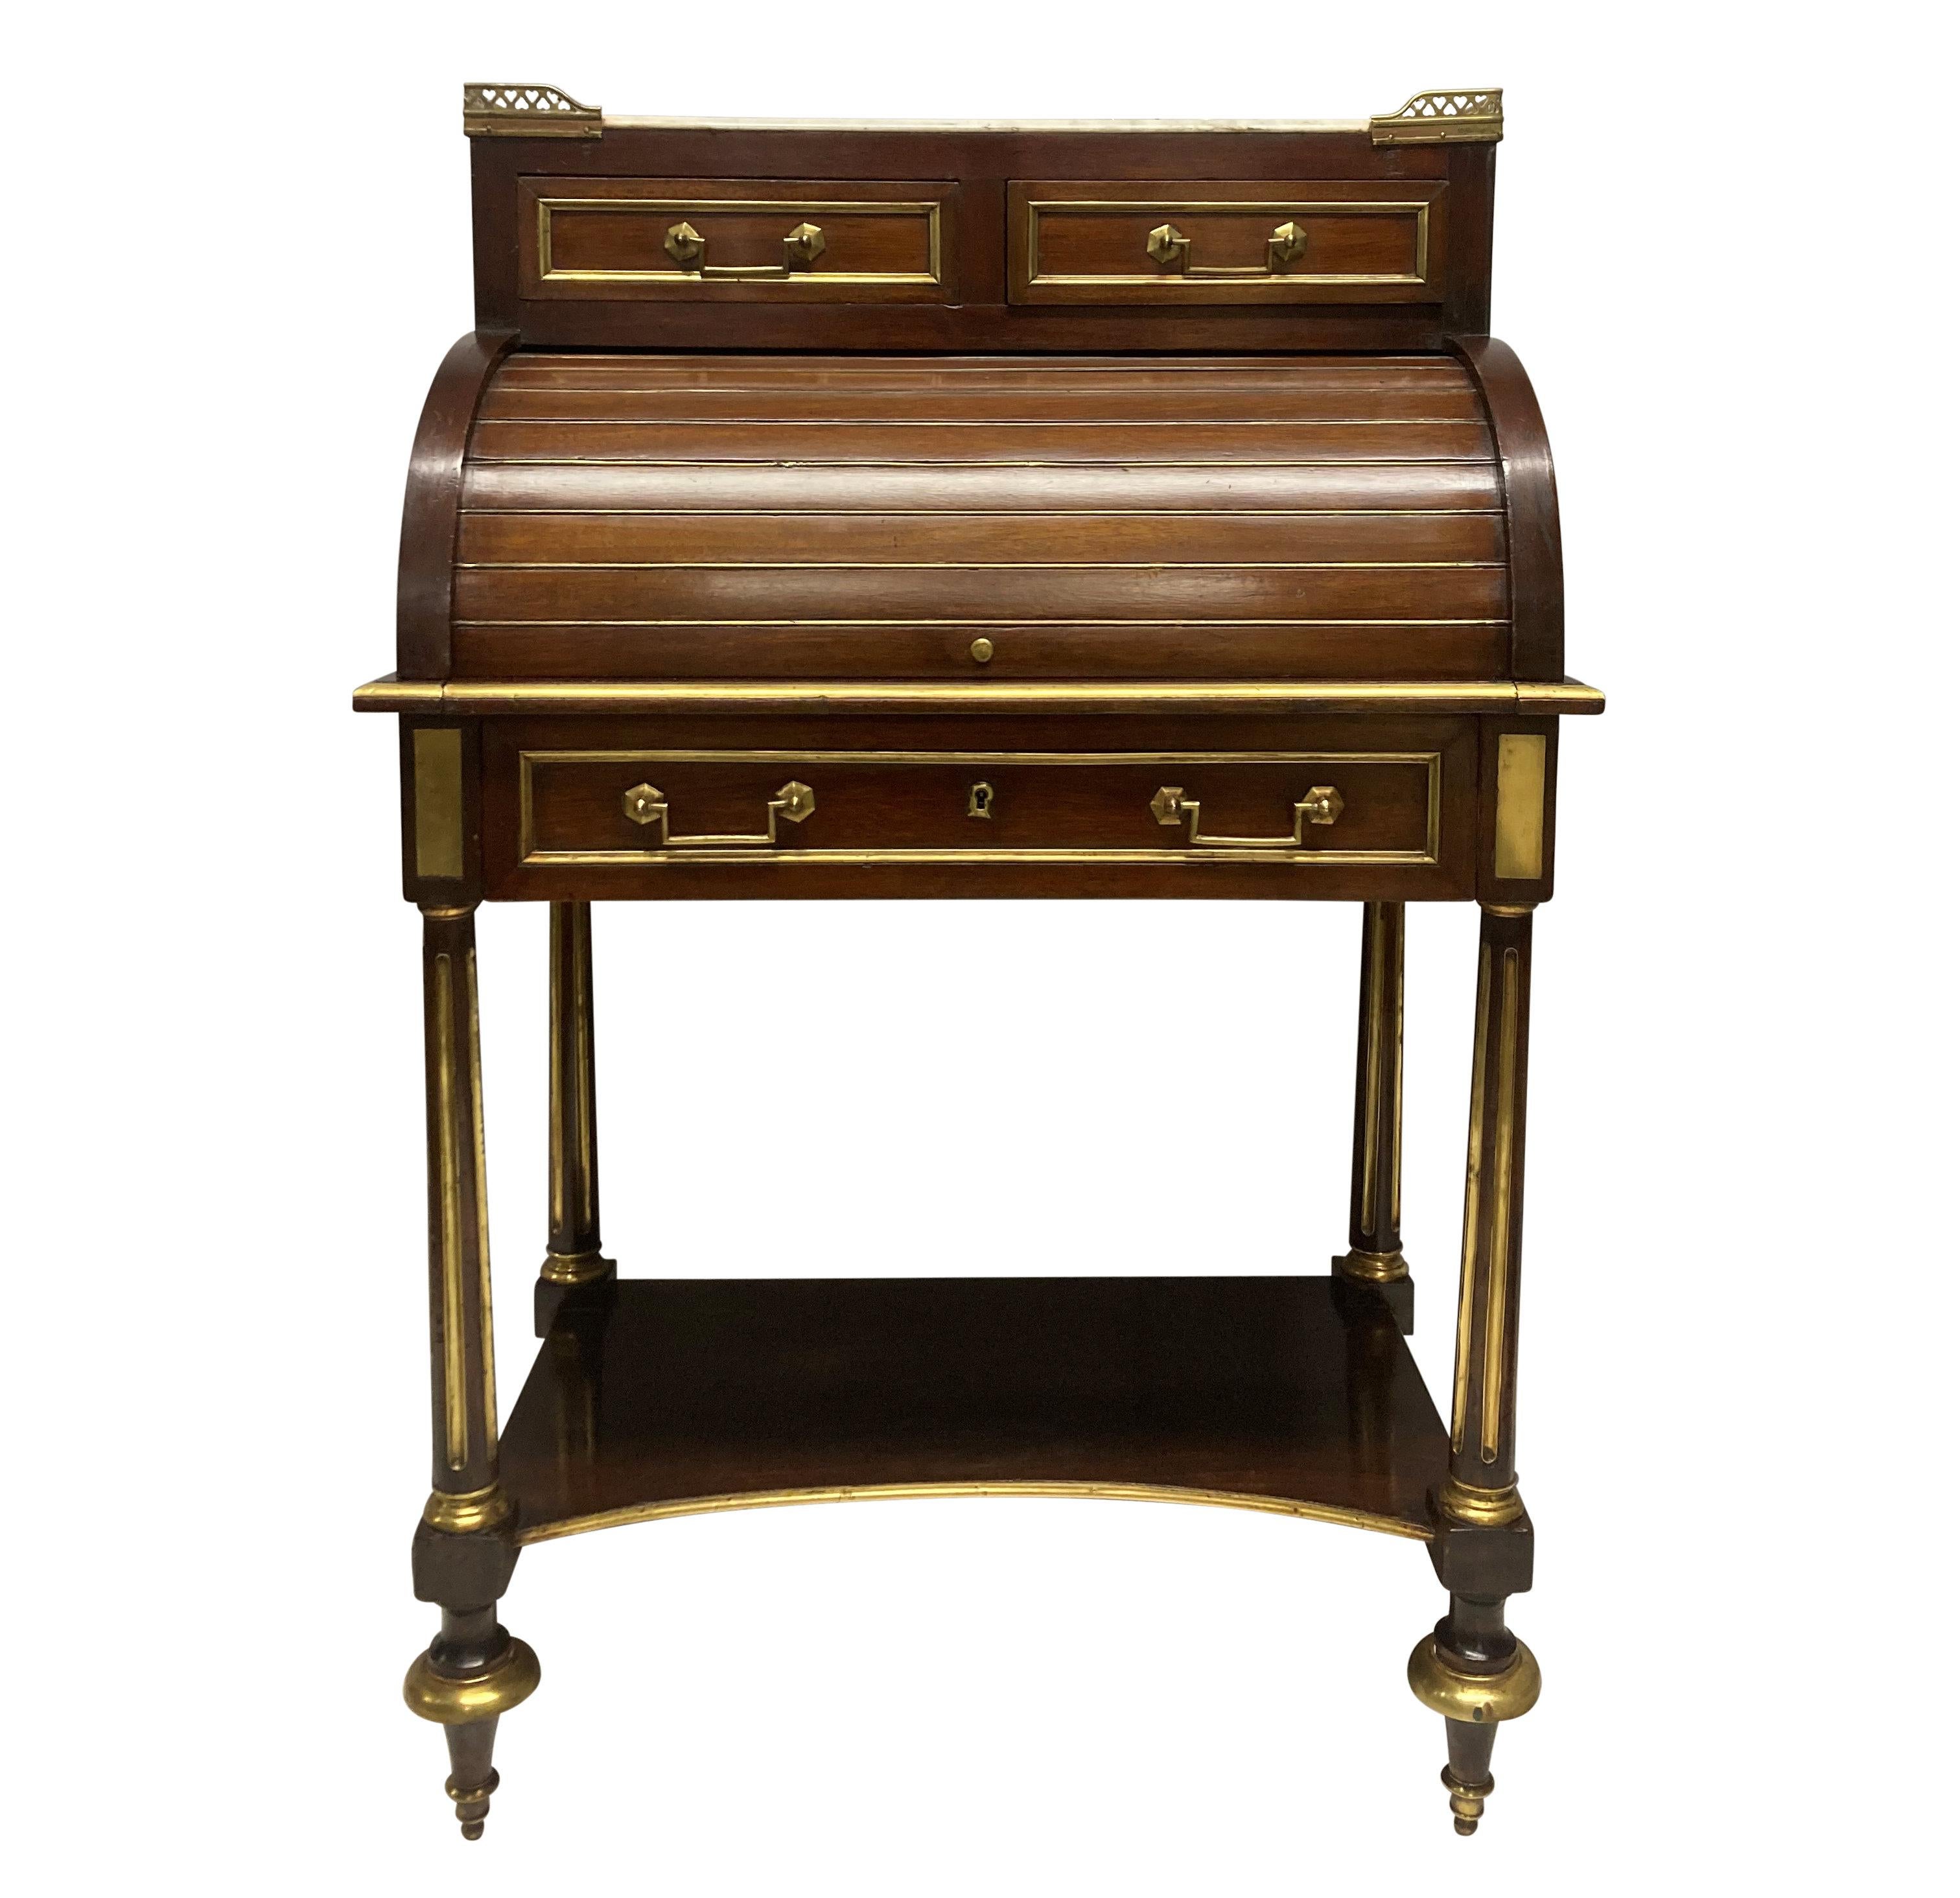 A small French Directoire mahogany cylinder desk, with brass detailing throughout. The roll top hiding a witing slope with a tooled leather top and two drawers. Above, a marble galleried top with two drawers below. The gallery pierced with hearts.